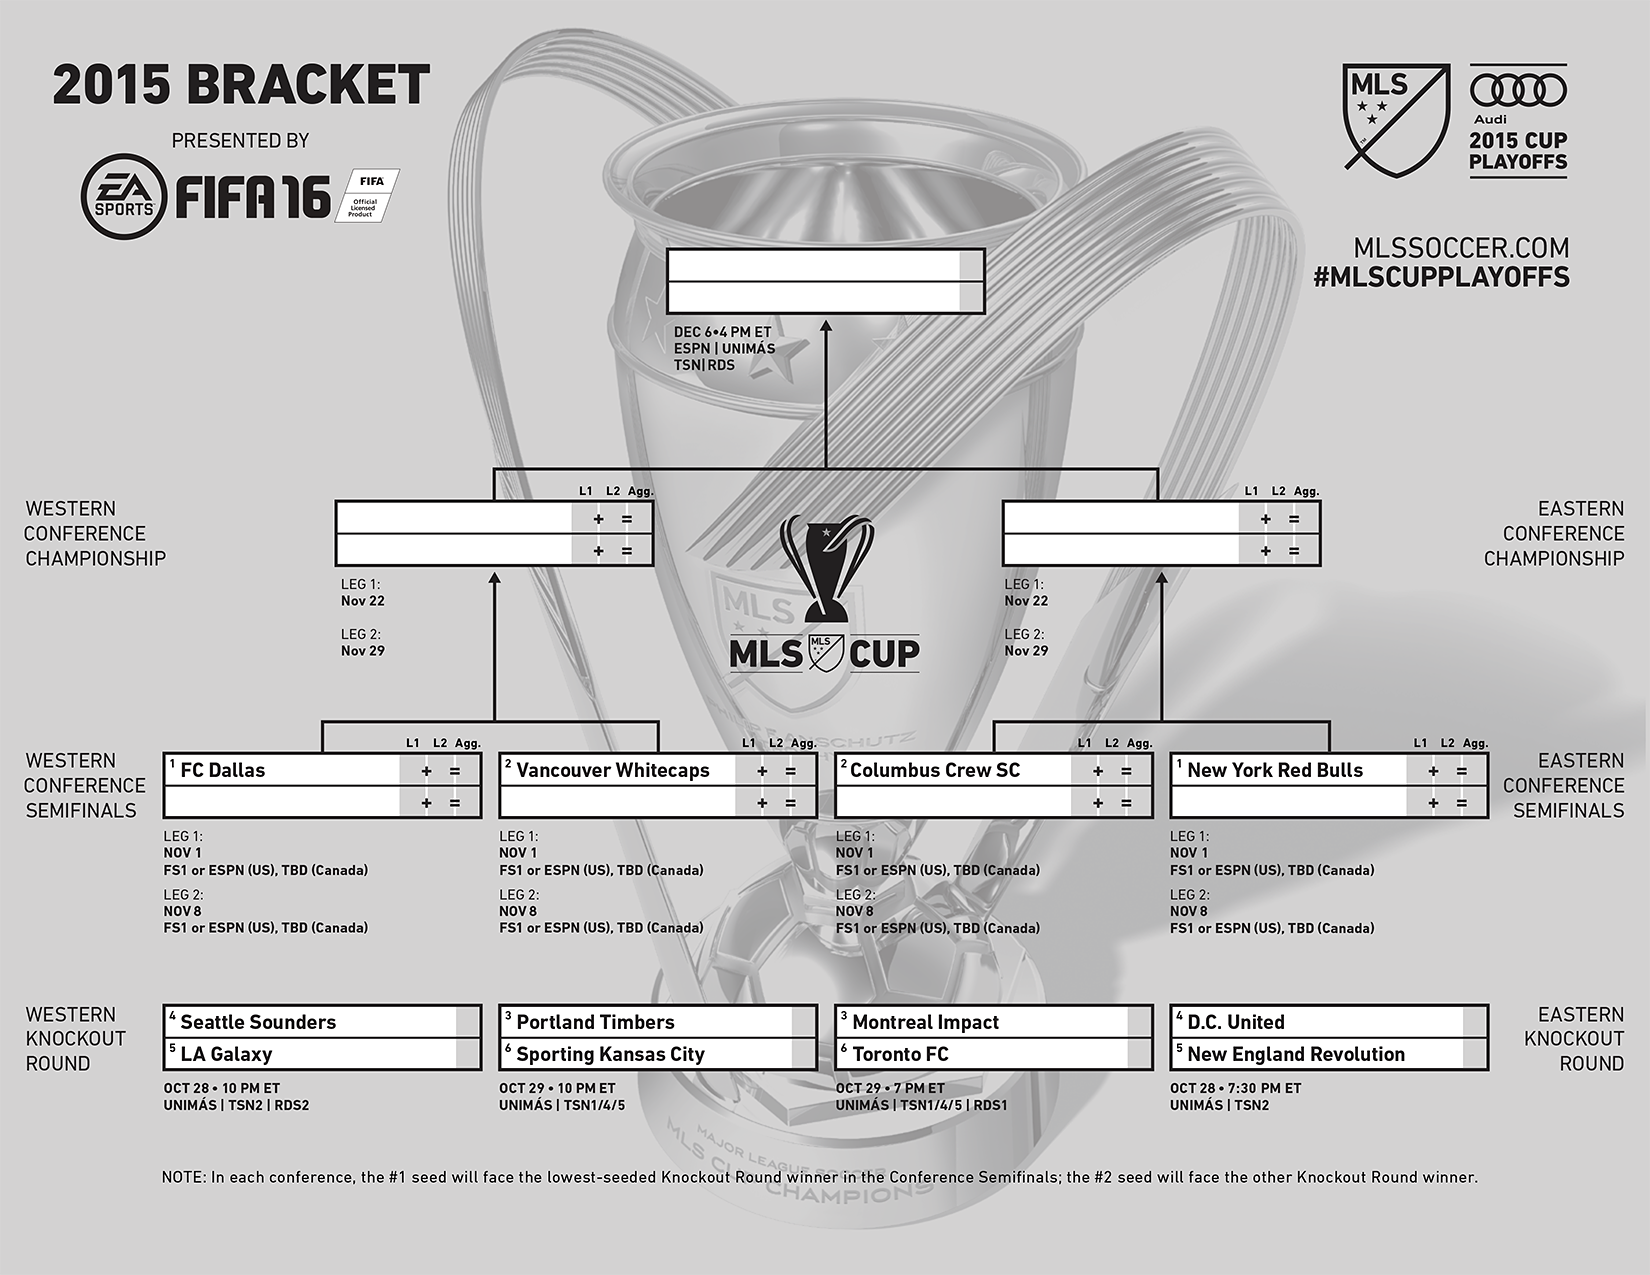 your mls playoff bracket ahead of the soundersfc-lagalaxy game at 7